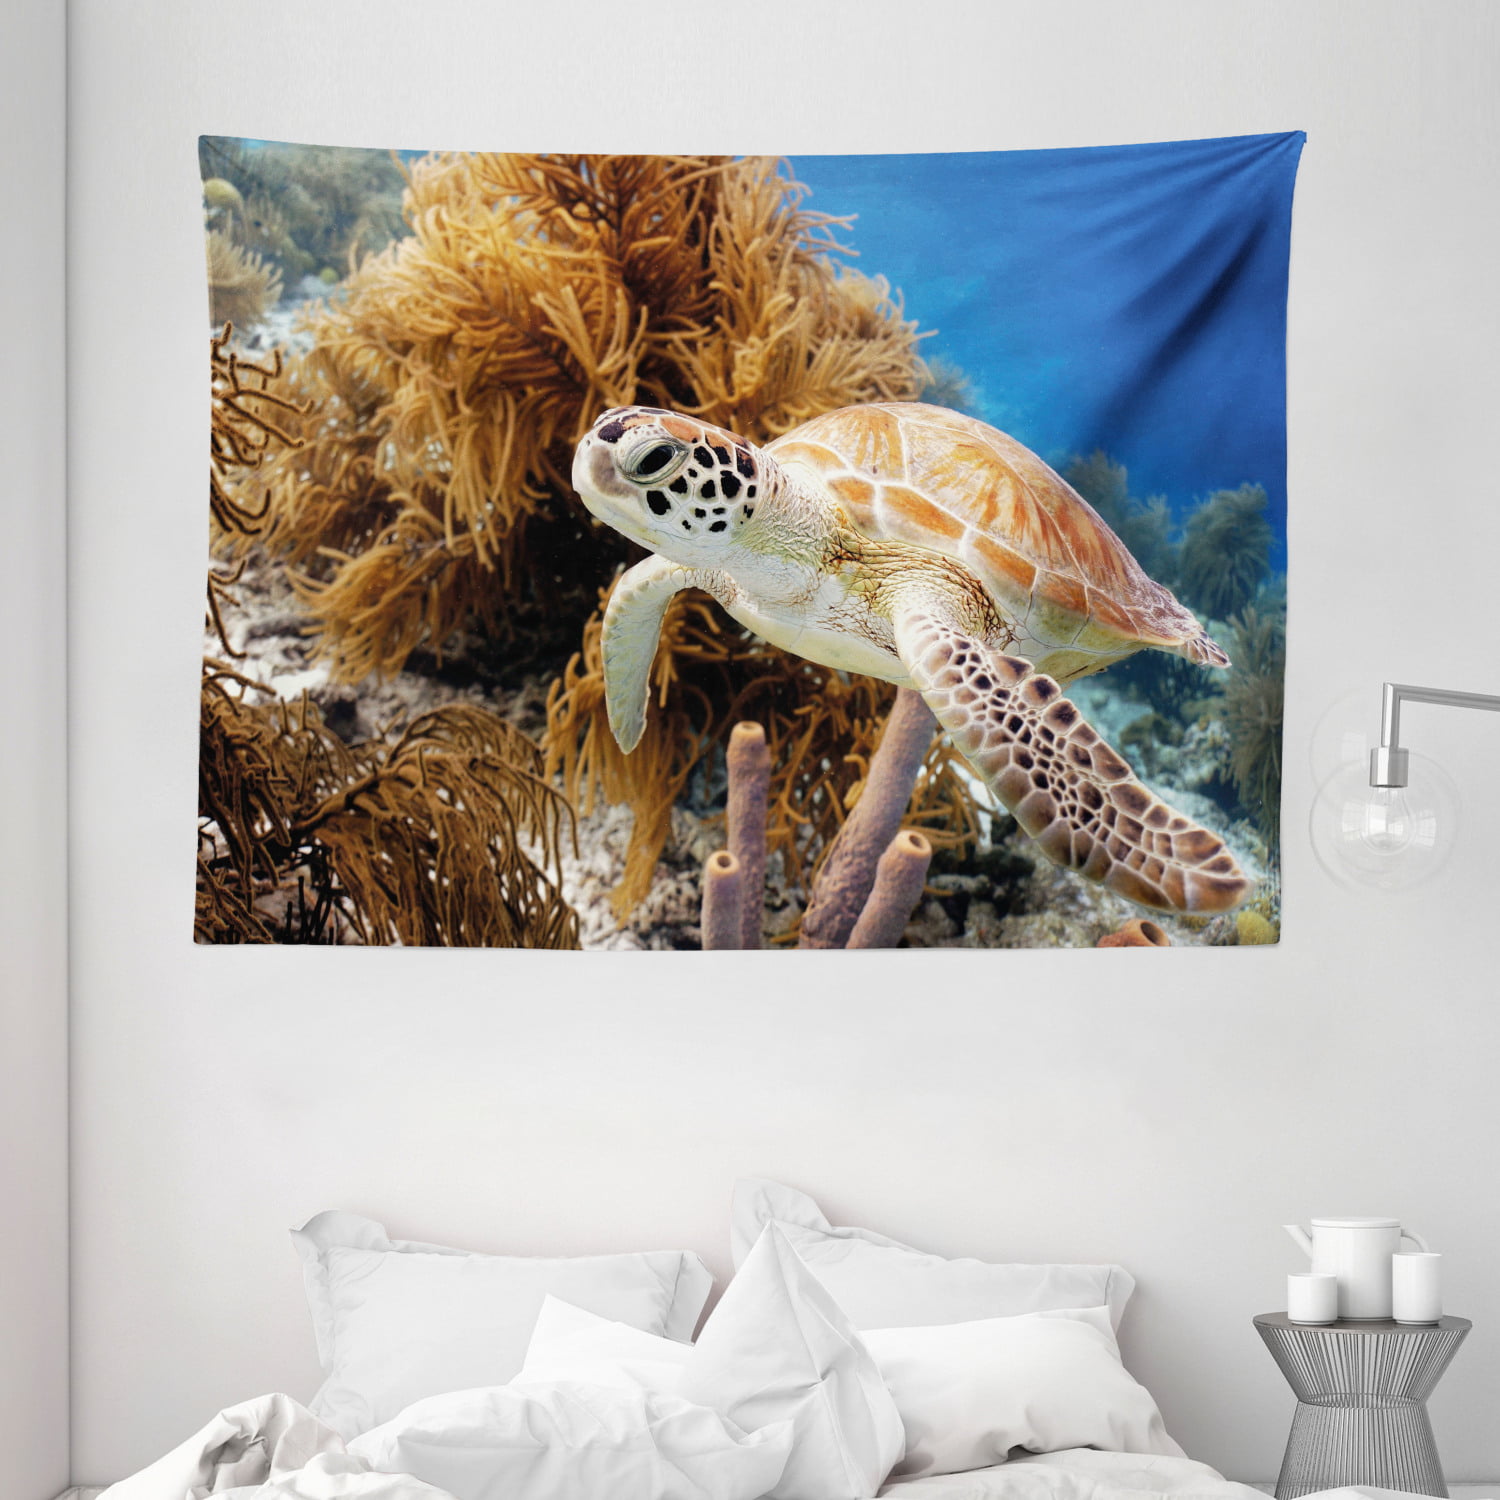 Turtle Tapestry, Coral Reef and Sea Turtle Close Up Photo Bonaire Island  Waters Maritime, Wall Hanging for Bedroom Living Room Dorm Decor, 80W X 60L  